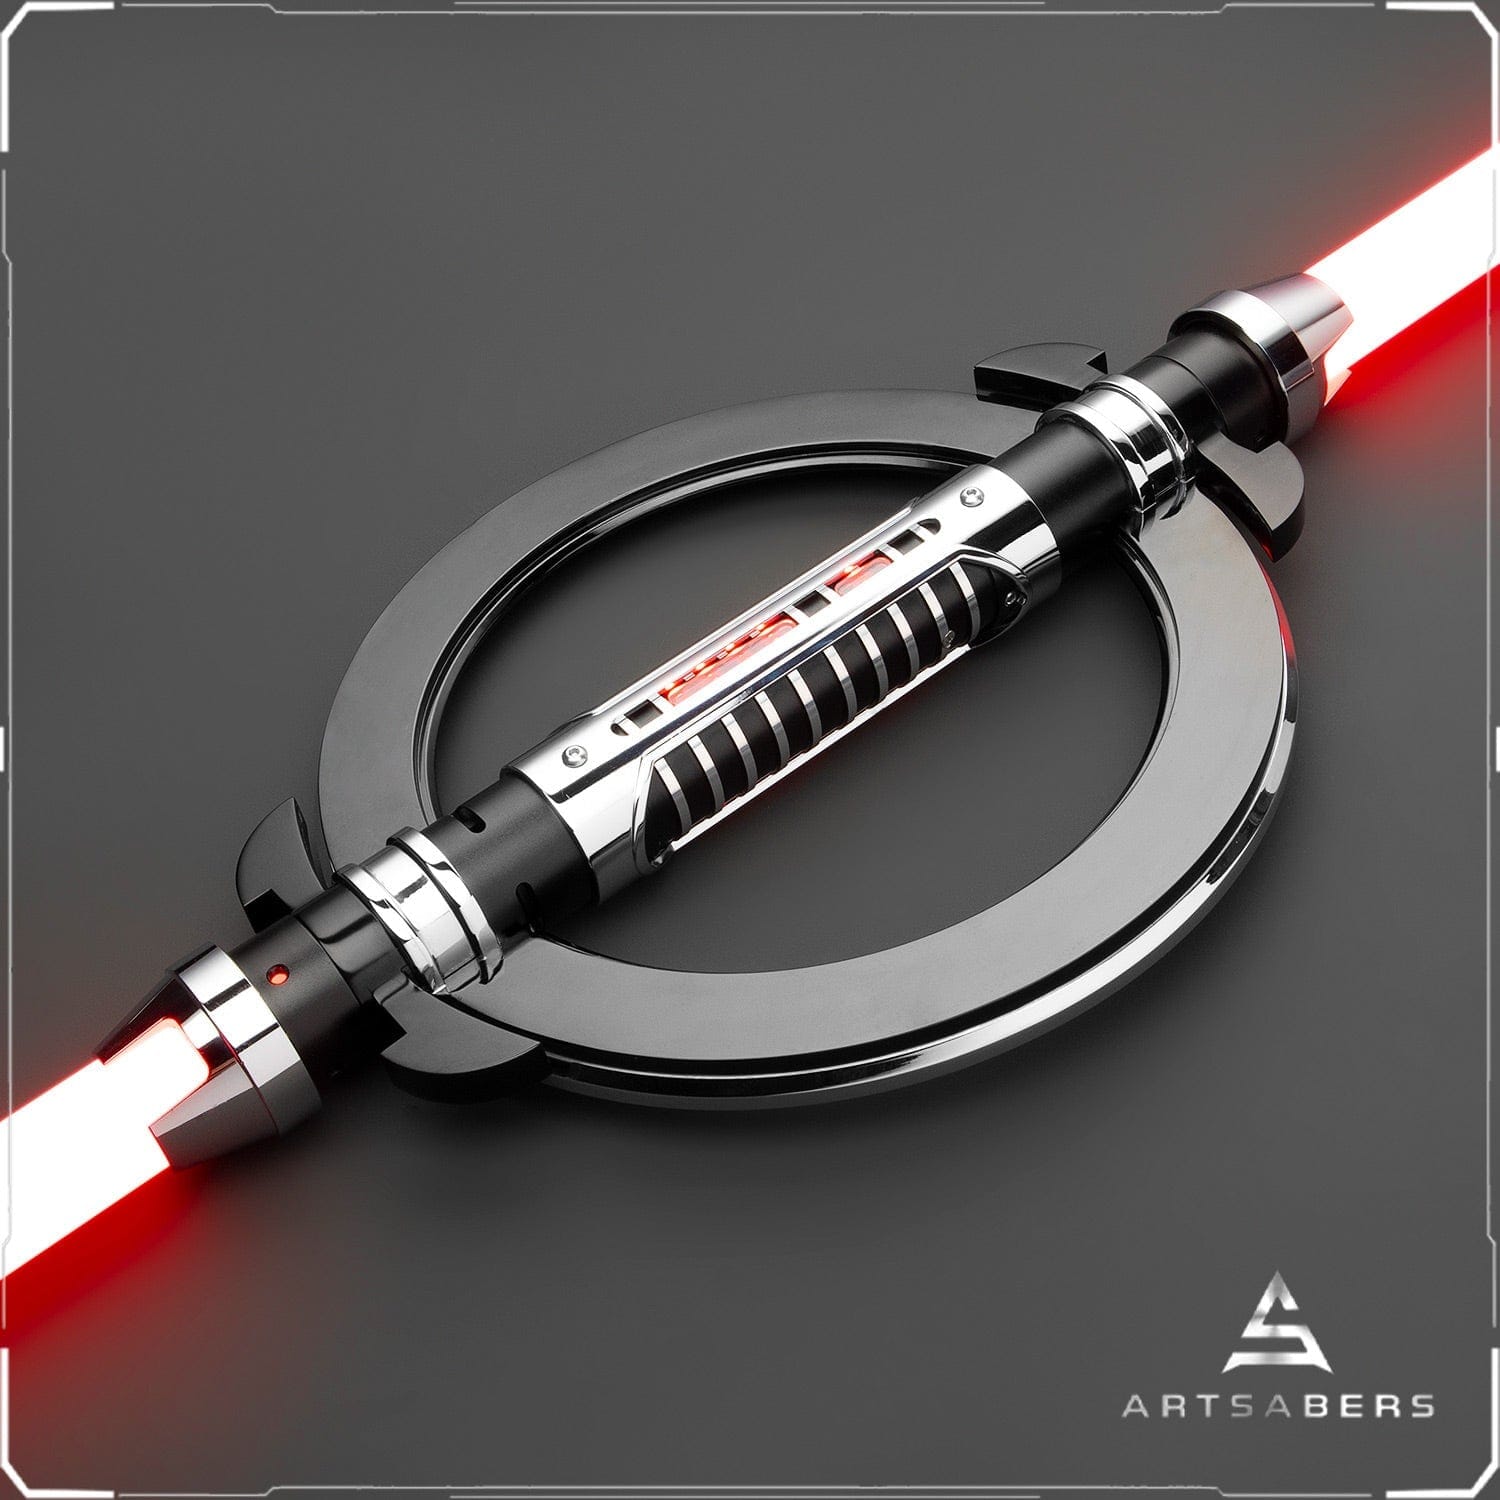 Grand Inquisitor Lightsaber Base Lit Lightsaber For Heavy Dueling Movie Replica ARTSABERS 